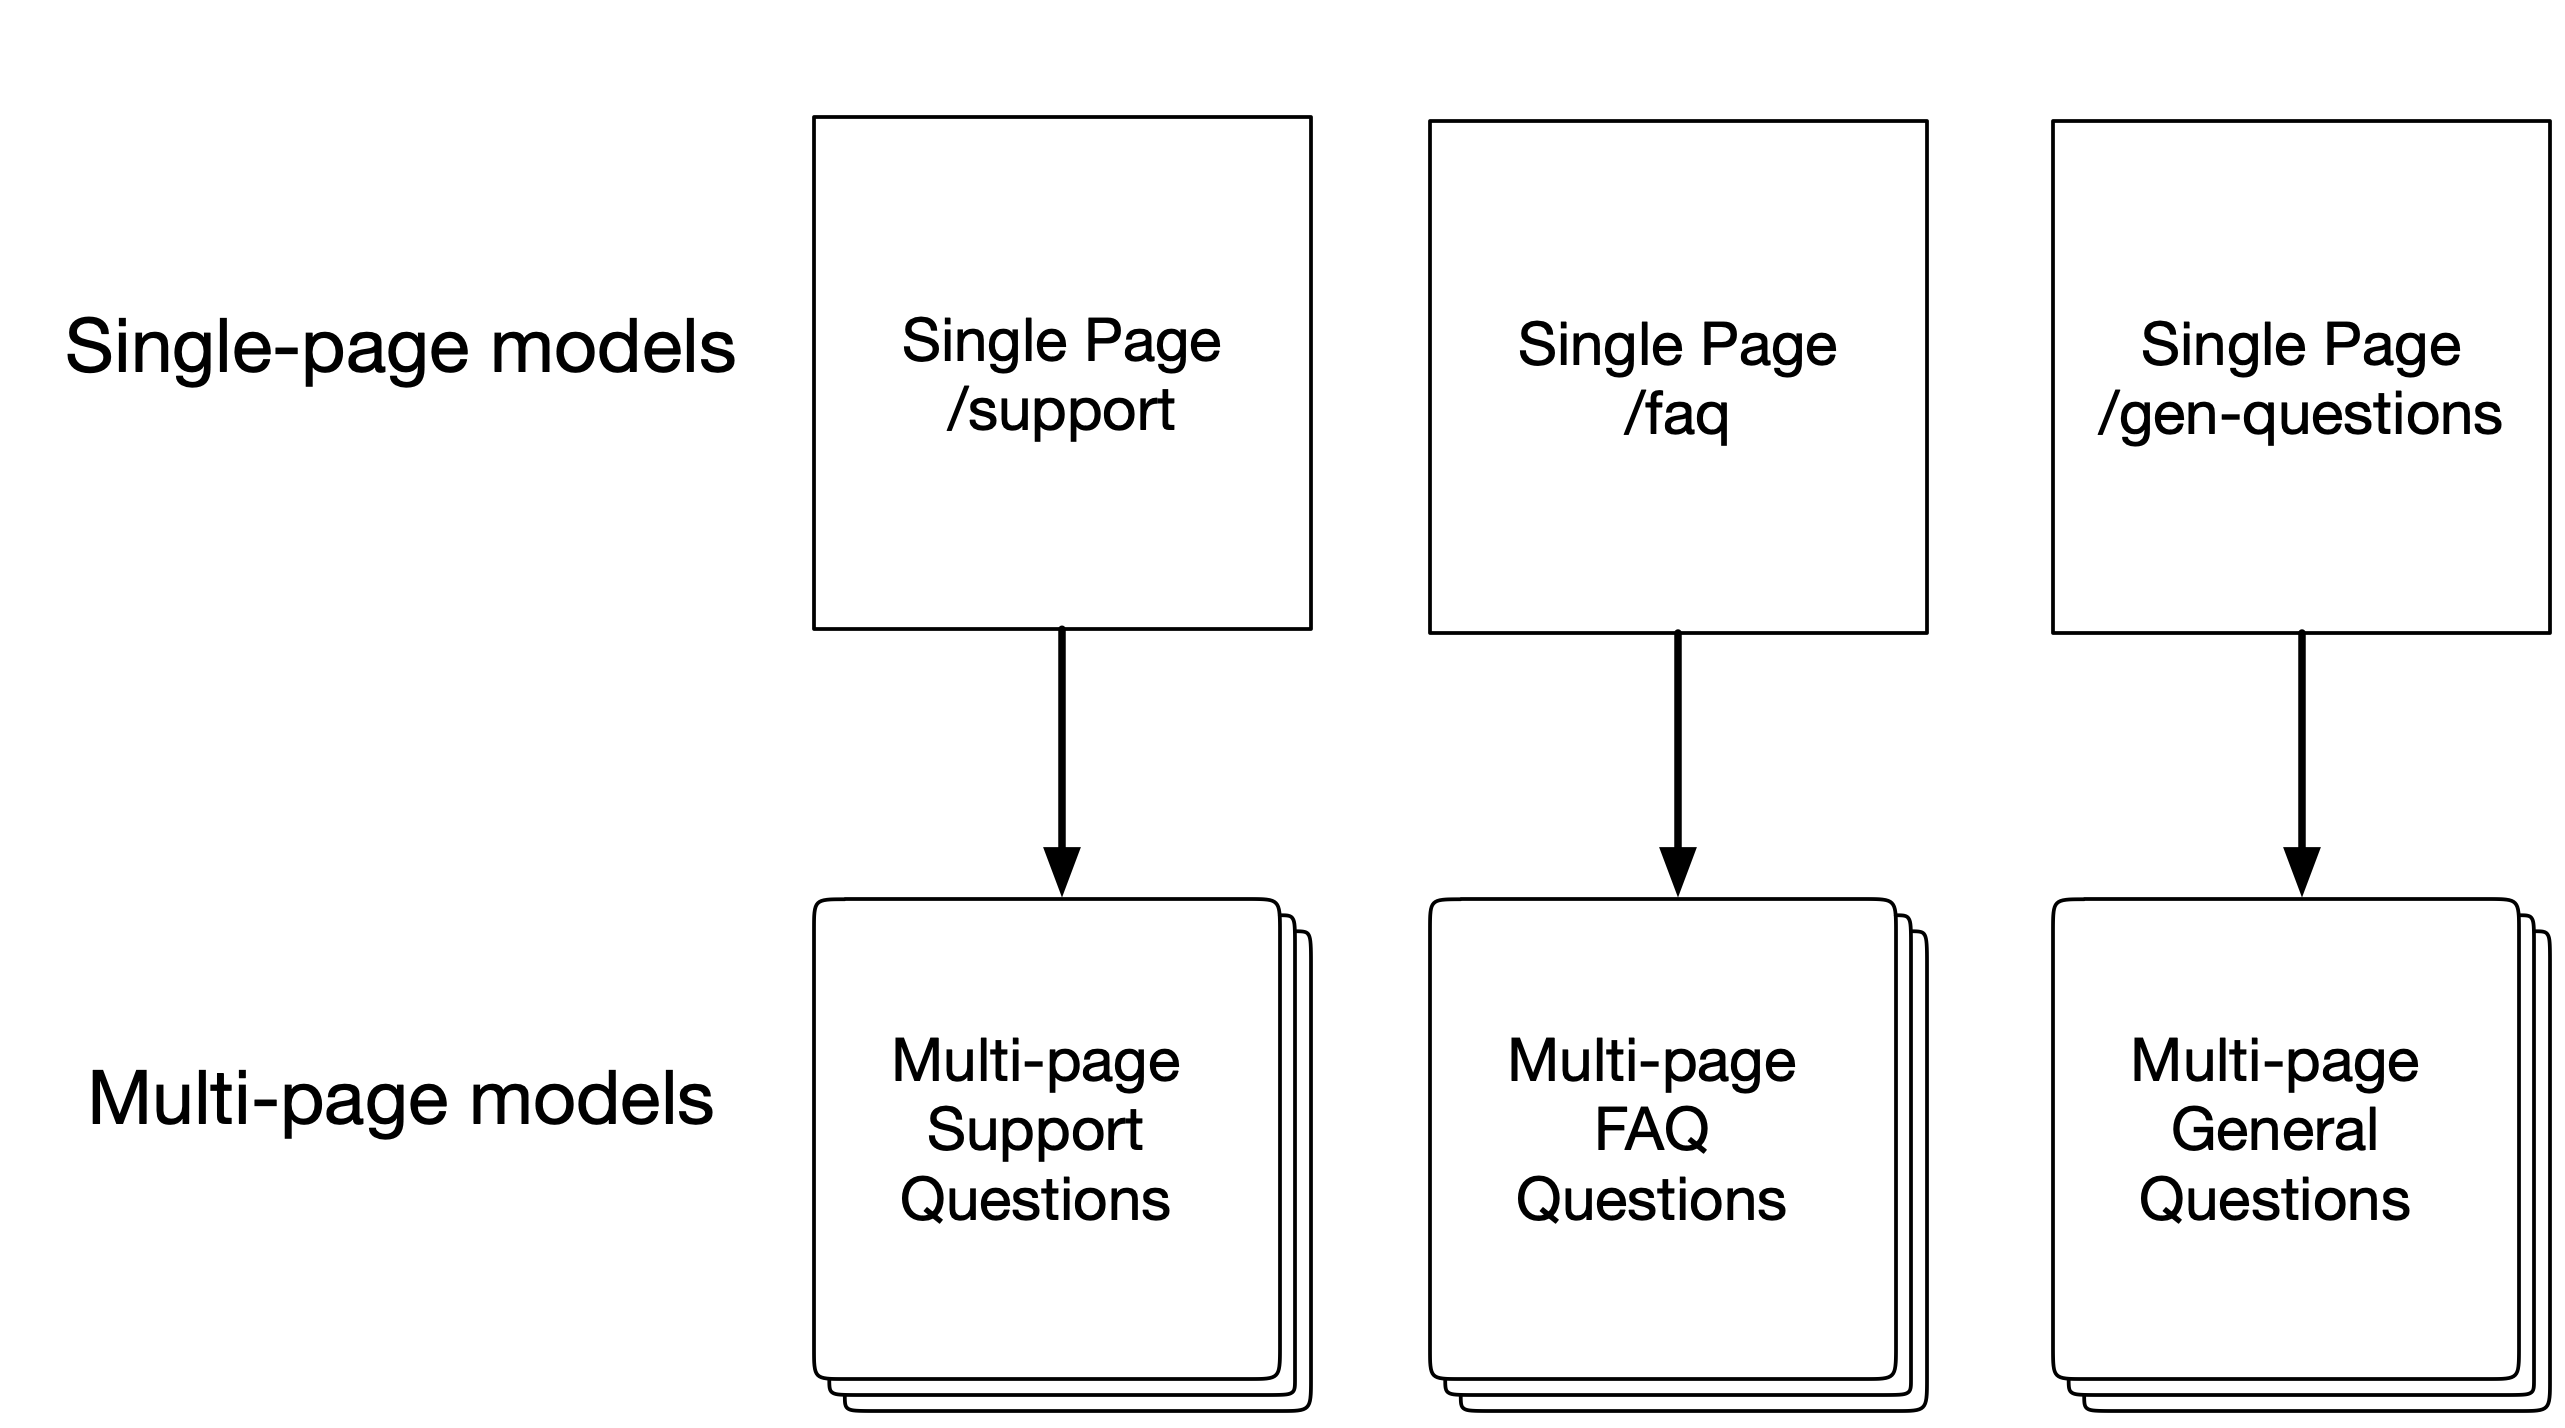 Each single-page model will have a multi-page model as its child.